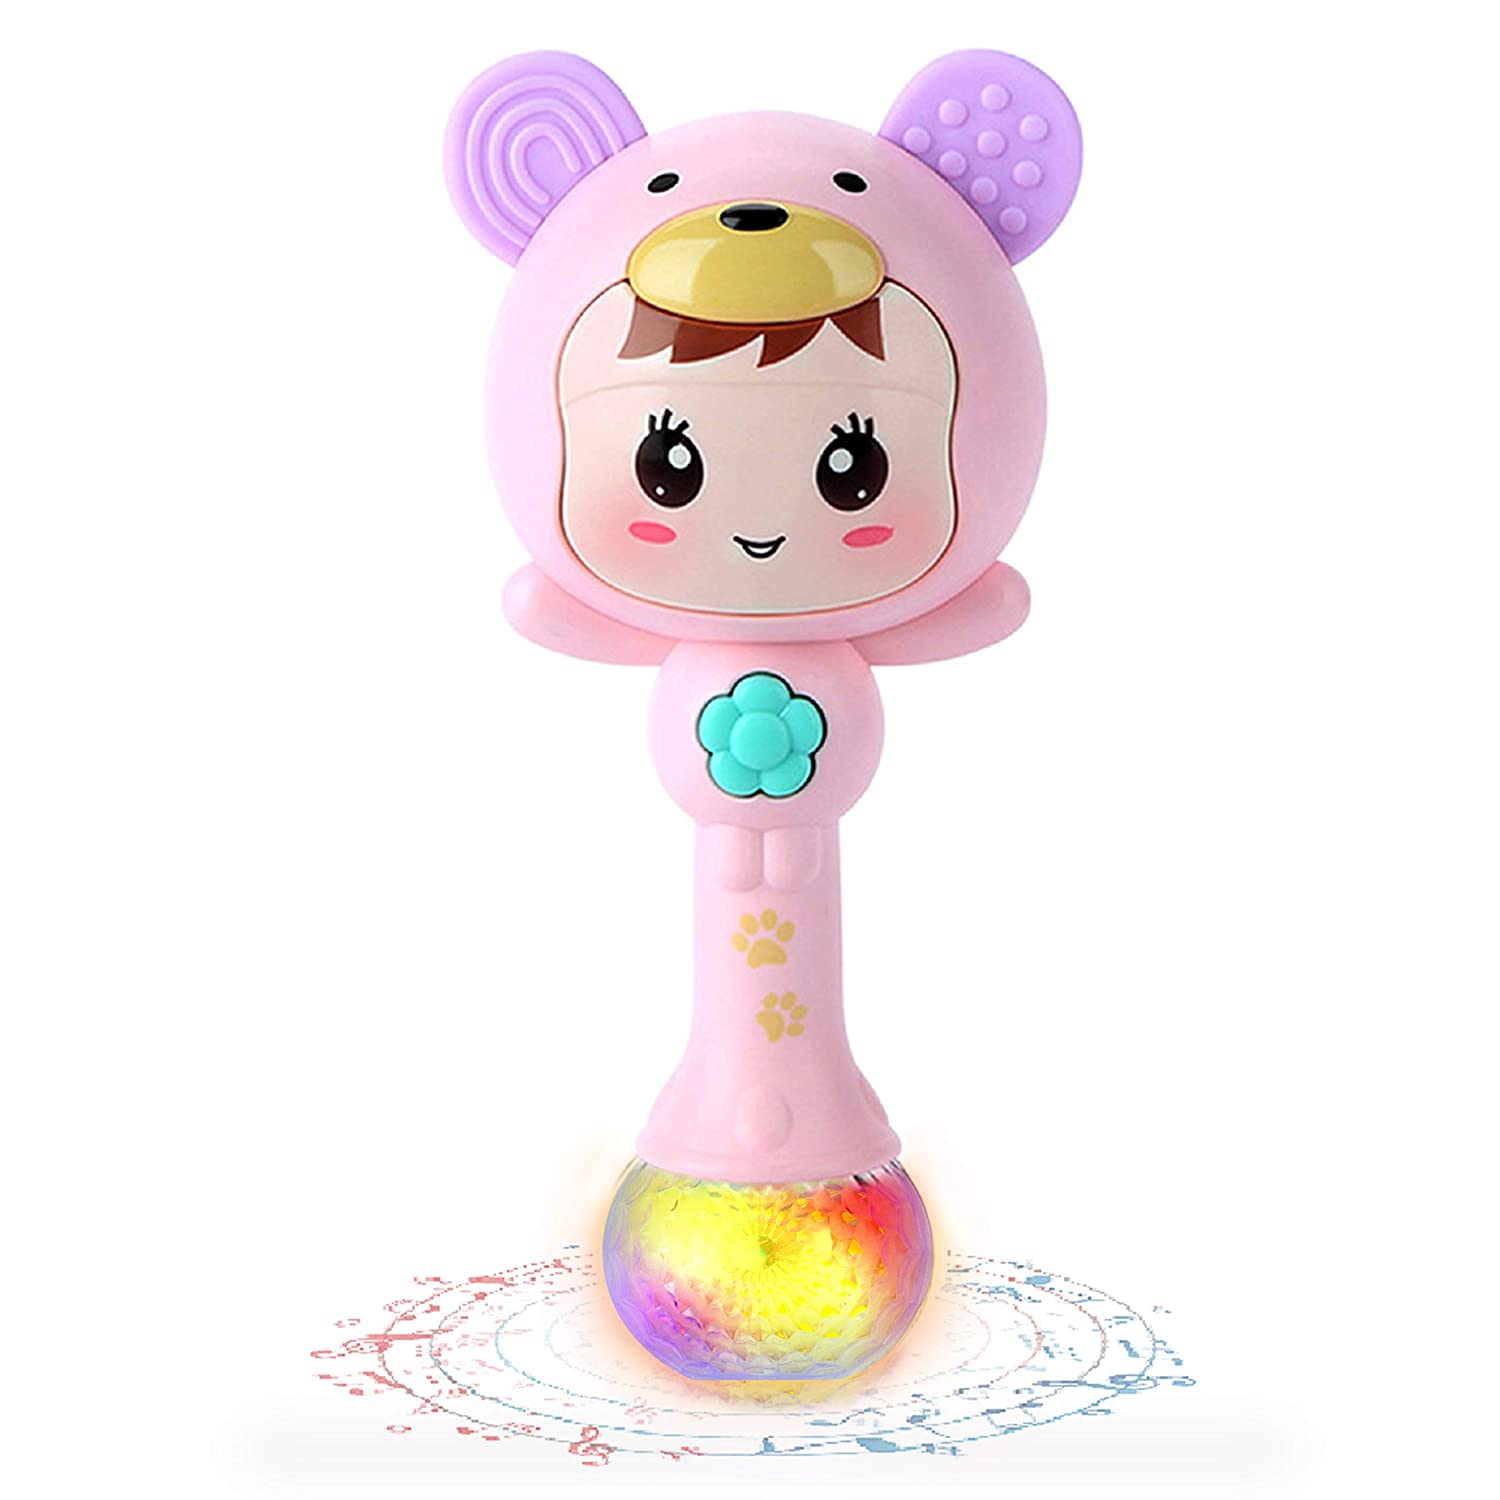 SLHFPX LOFEE Rattle Toy Infants 3-6 Months, Musical Toy for 3-12 Months Baby Toy for 6-12 Months Girl Gift for 0-6 Months Boy Birthday Gift for Infant Toys 6 Months MATINC